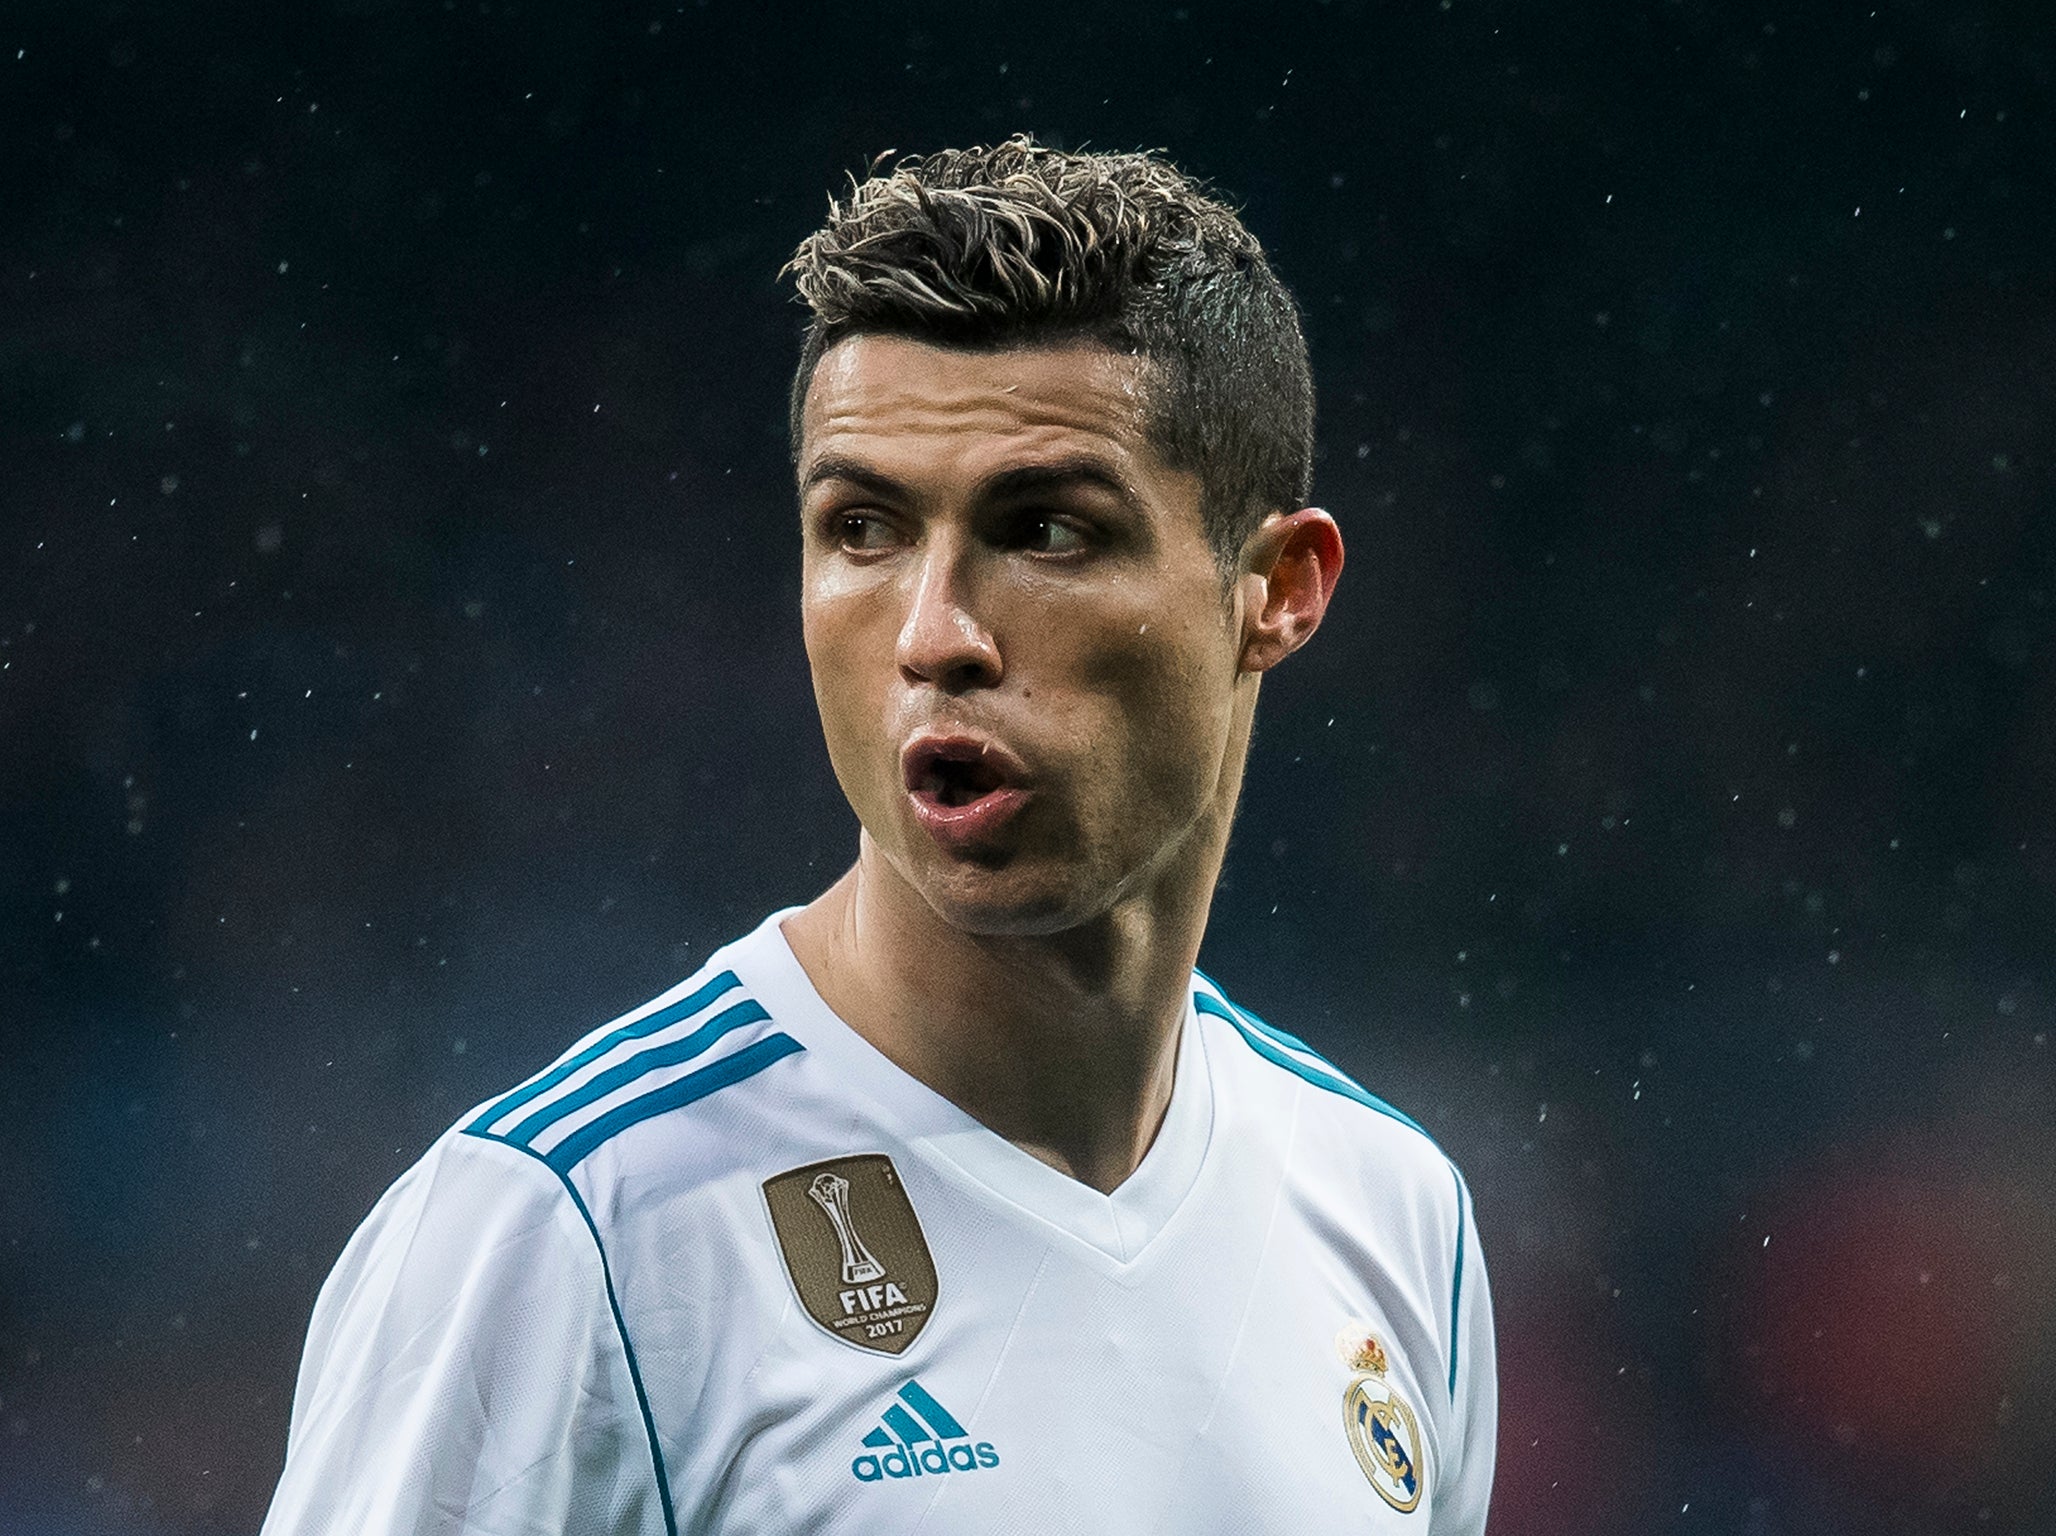 Cristiano Ronaldo has successfully remodeled his game